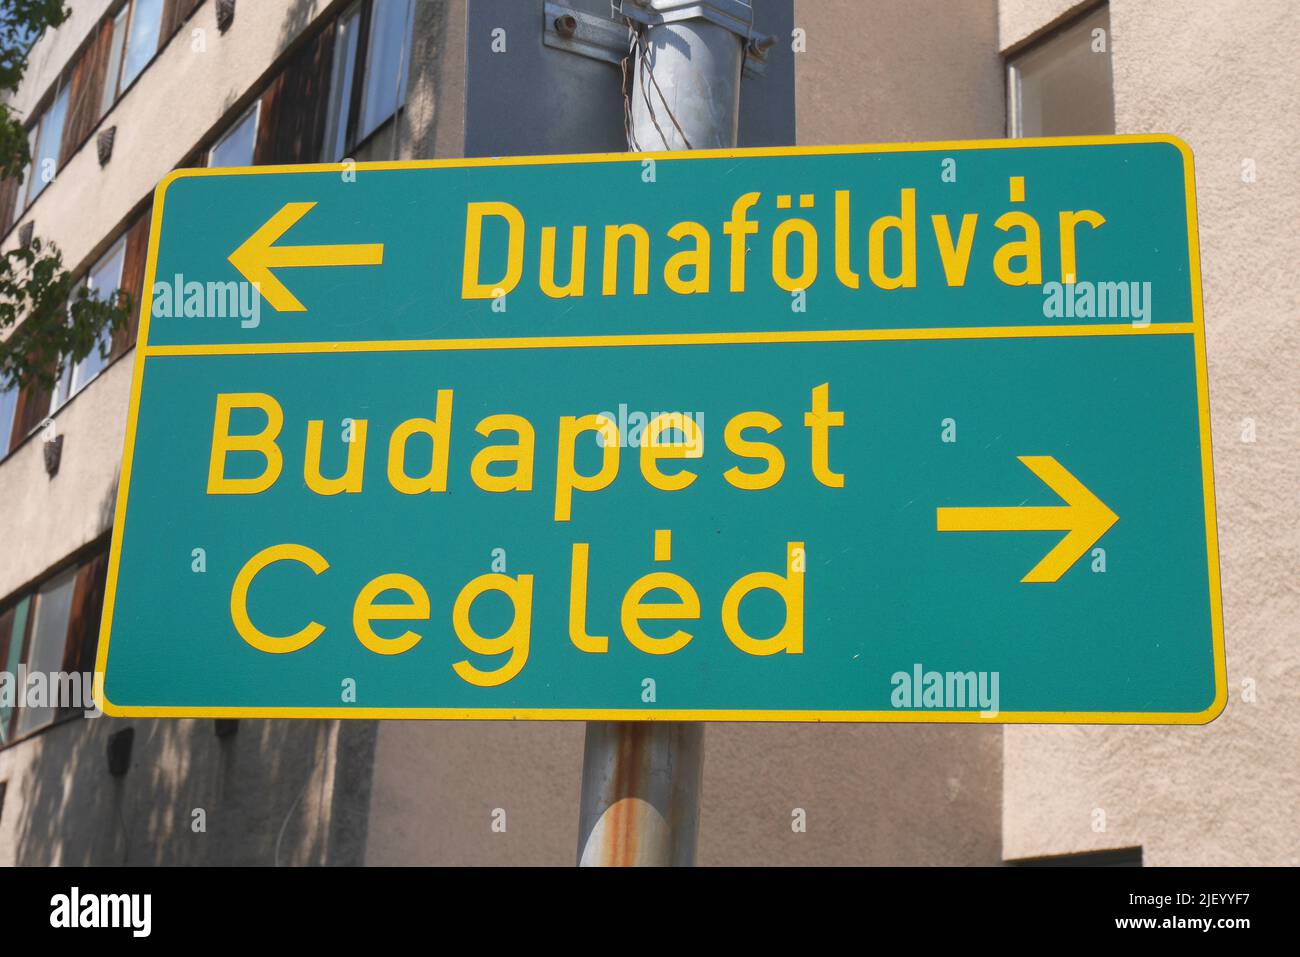 Road sign pointing to Dunafoldvar, Budapest and Cegled, Kecskemet, Hungary Stock Photo